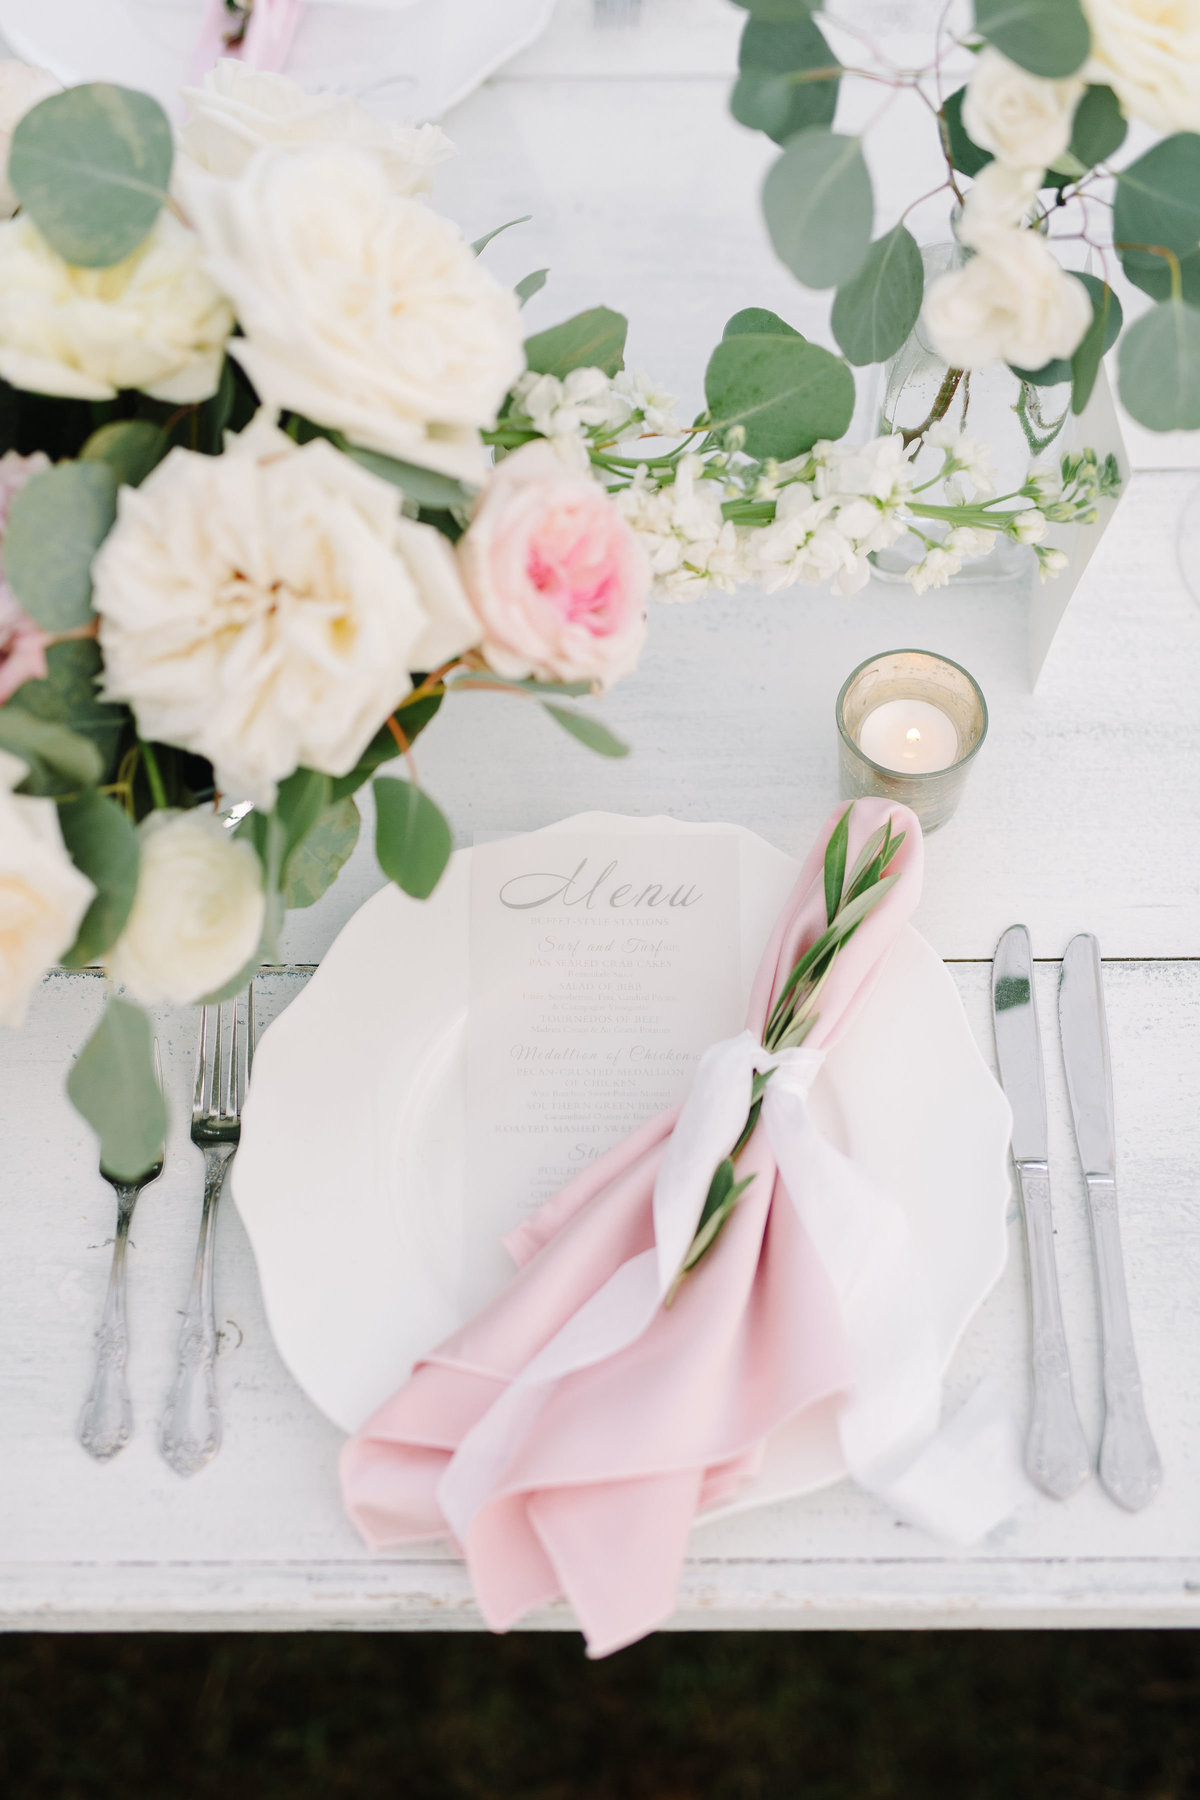 Blush Pink Napkin Fold tied with Ribbon and Sprig of greenery on White Farm Table with Silverware Place Setting